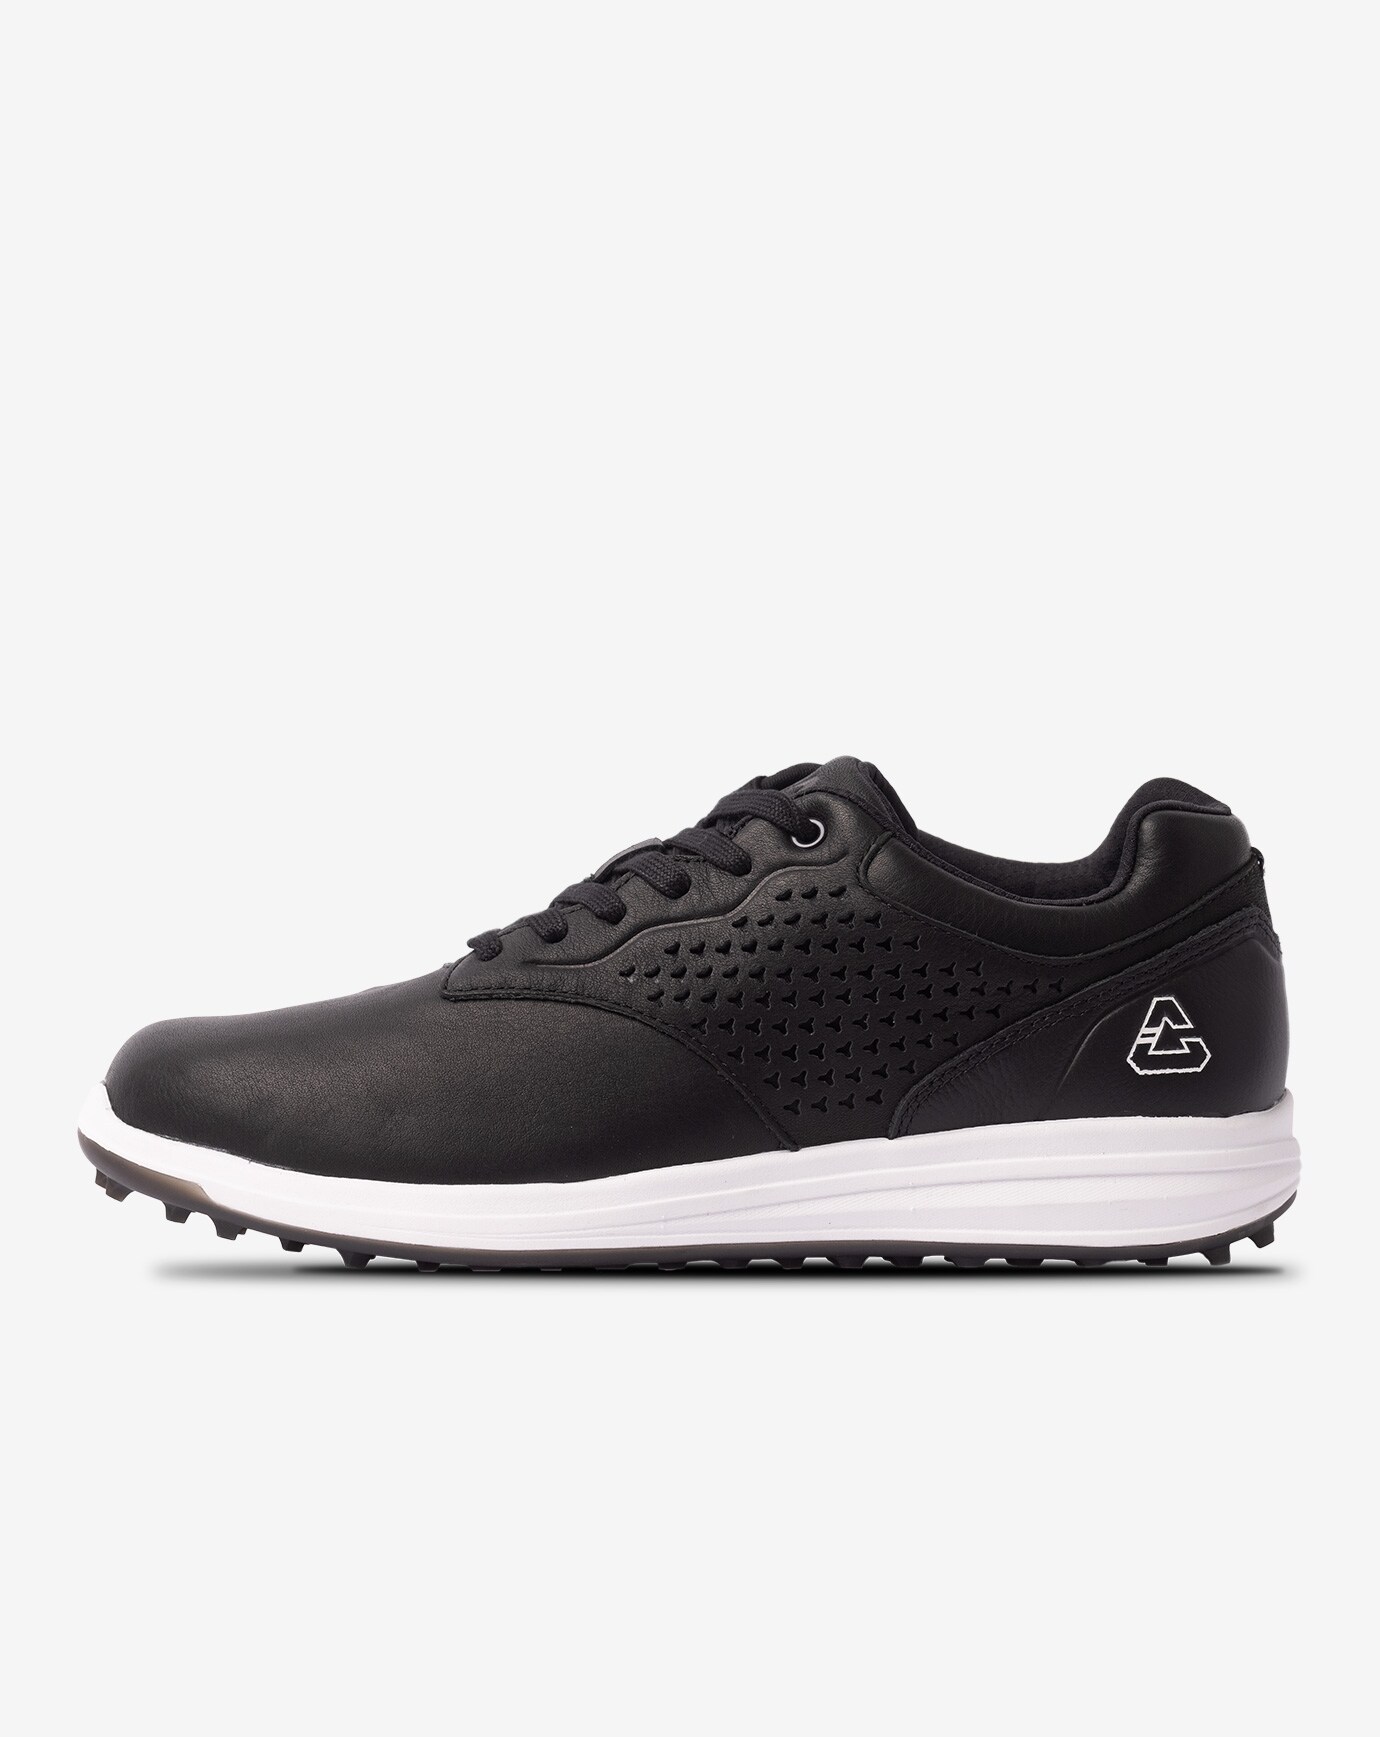 THE MONEYMAKER LUX SPIKELESS GOLF SHOE Image 1